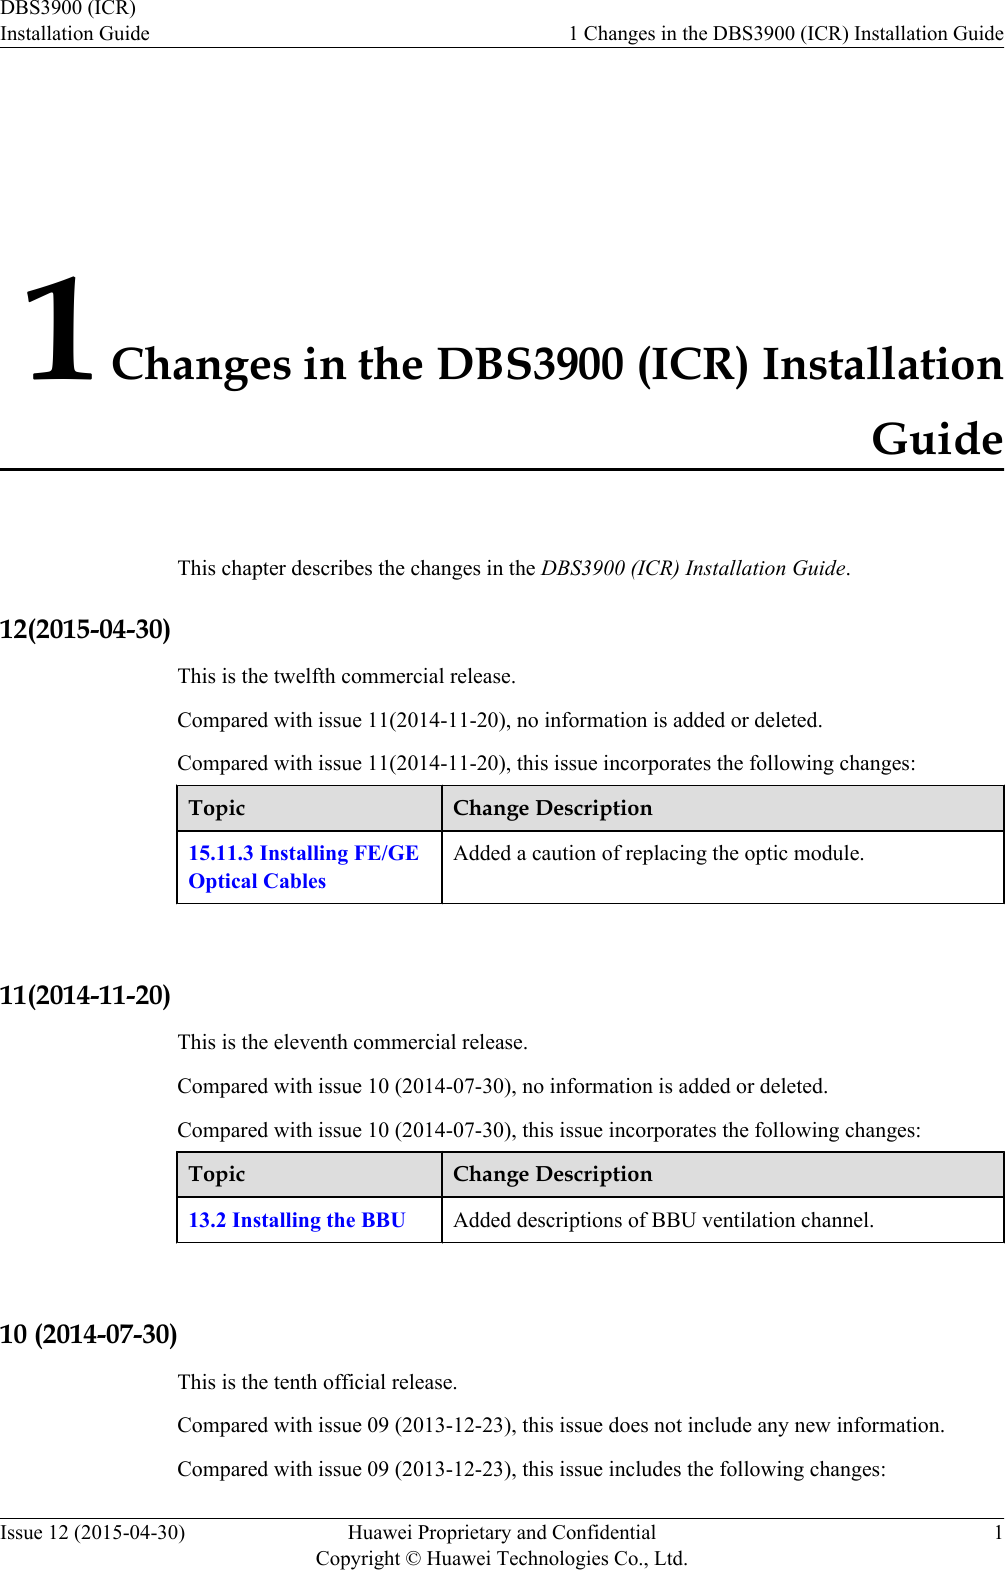 1 Changes in the DBS3900 (ICR) InstallationGuideThis chapter describes the changes in the DBS3900 (ICR) Installation Guide.12(2015-04-30)This is the twelfth commercial release.Compared with issue 11(2014-11-20), no information is added or deleted.Compared with issue 11(2014-11-20), this issue incorporates the following changes:Topic Change Description15.11.3 Installing FE/GEOptical CablesAdded a caution of replacing the optic module. 11(2014-11-20)This is the eleventh commercial release.Compared with issue 10 (2014-07-30), no information is added or deleted.Compared with issue 10 (2014-07-30), this issue incorporates the following changes:Topic Change Description13.2 Installing the BBU Added descriptions of BBU ventilation channel. 10 (2014-07-30)This is the tenth official release.Compared with issue 09 (2013-12-23), this issue does not include any new information.Compared with issue 09 (2013-12-23), this issue includes the following changes:DBS3900 (ICR)Installation Guide 1 Changes in the DBS3900 (ICR) Installation GuideIssue 12 (2015-04-30) Huawei Proprietary and ConfidentialCopyright © Huawei Technologies Co., Ltd.1